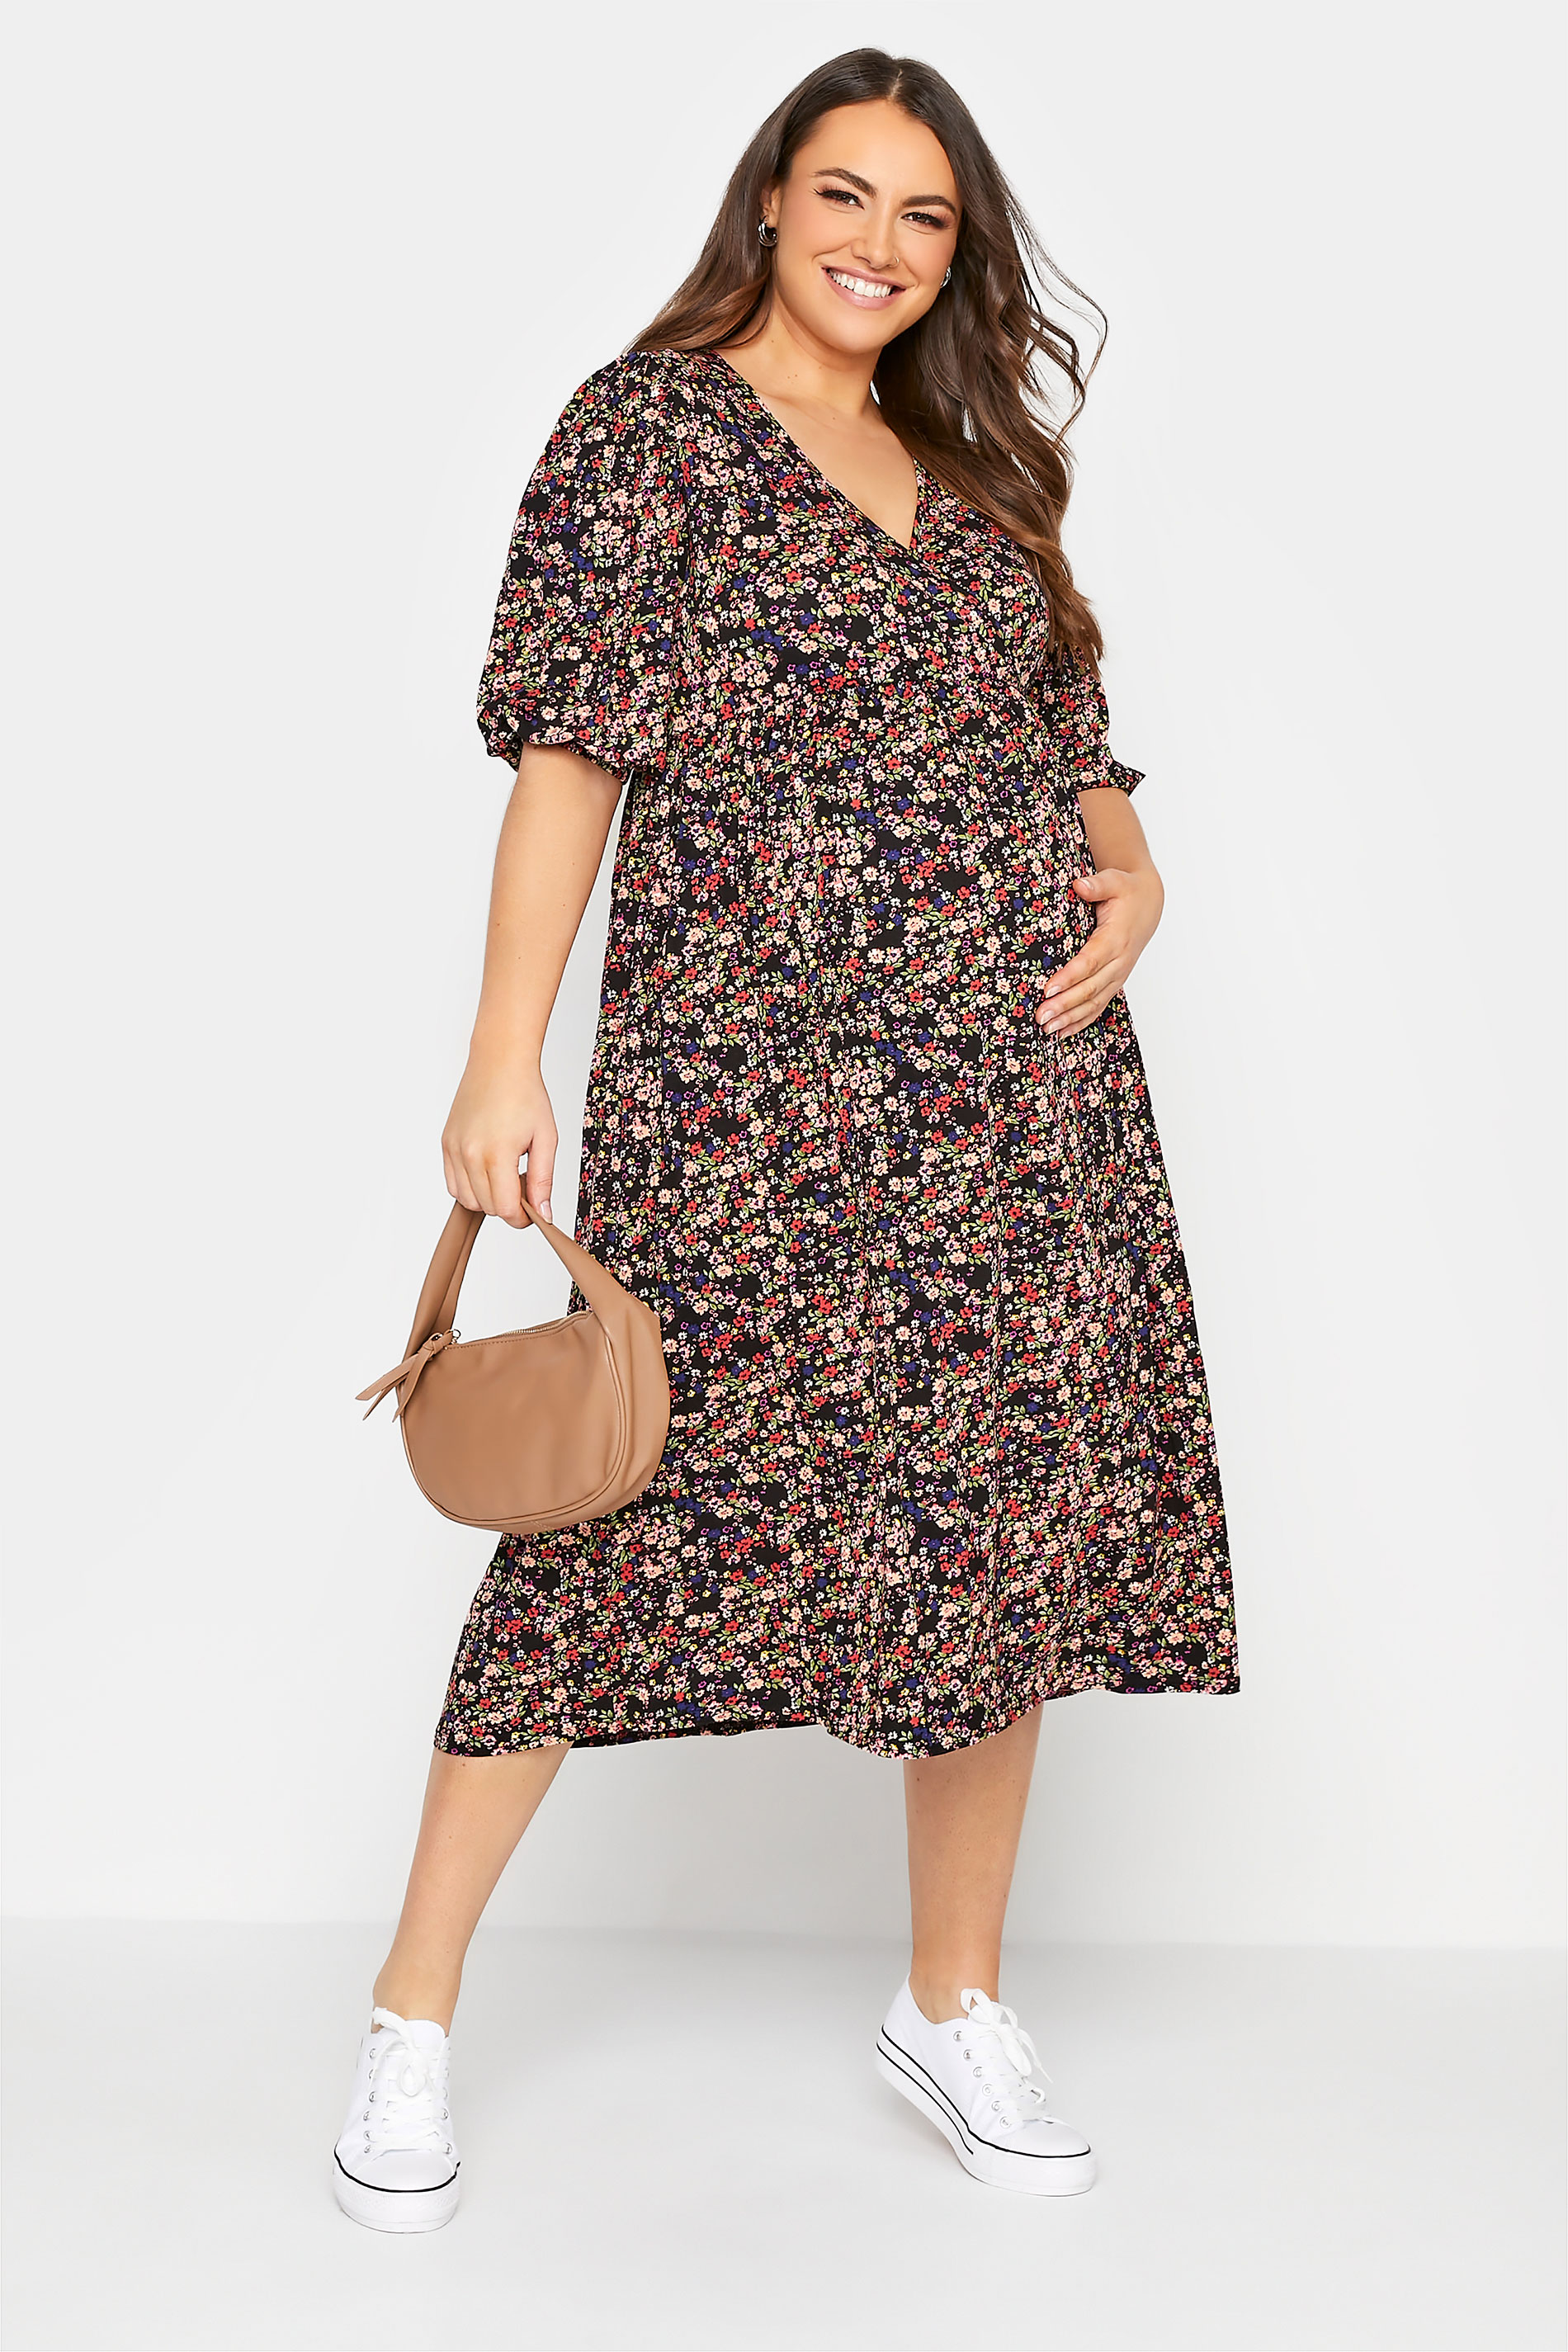 BUMP IT UP MATERNITY Plus Size Black Ditsy Wrap Dress | Yours Clothing 1